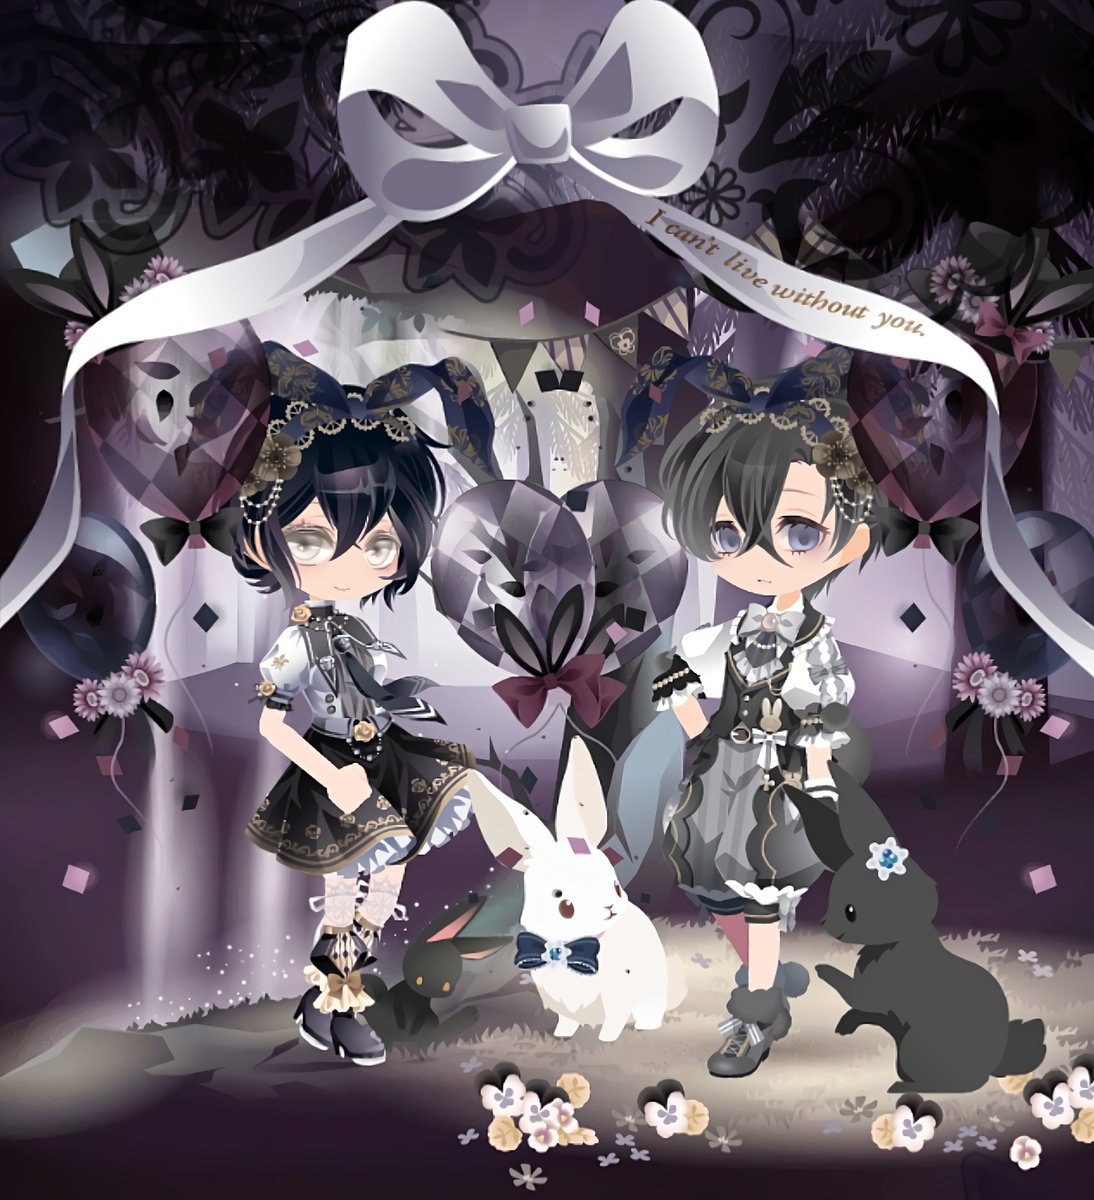 rabbit family affair#ココプレ #cocoppaplay Converted by #waifu2x 